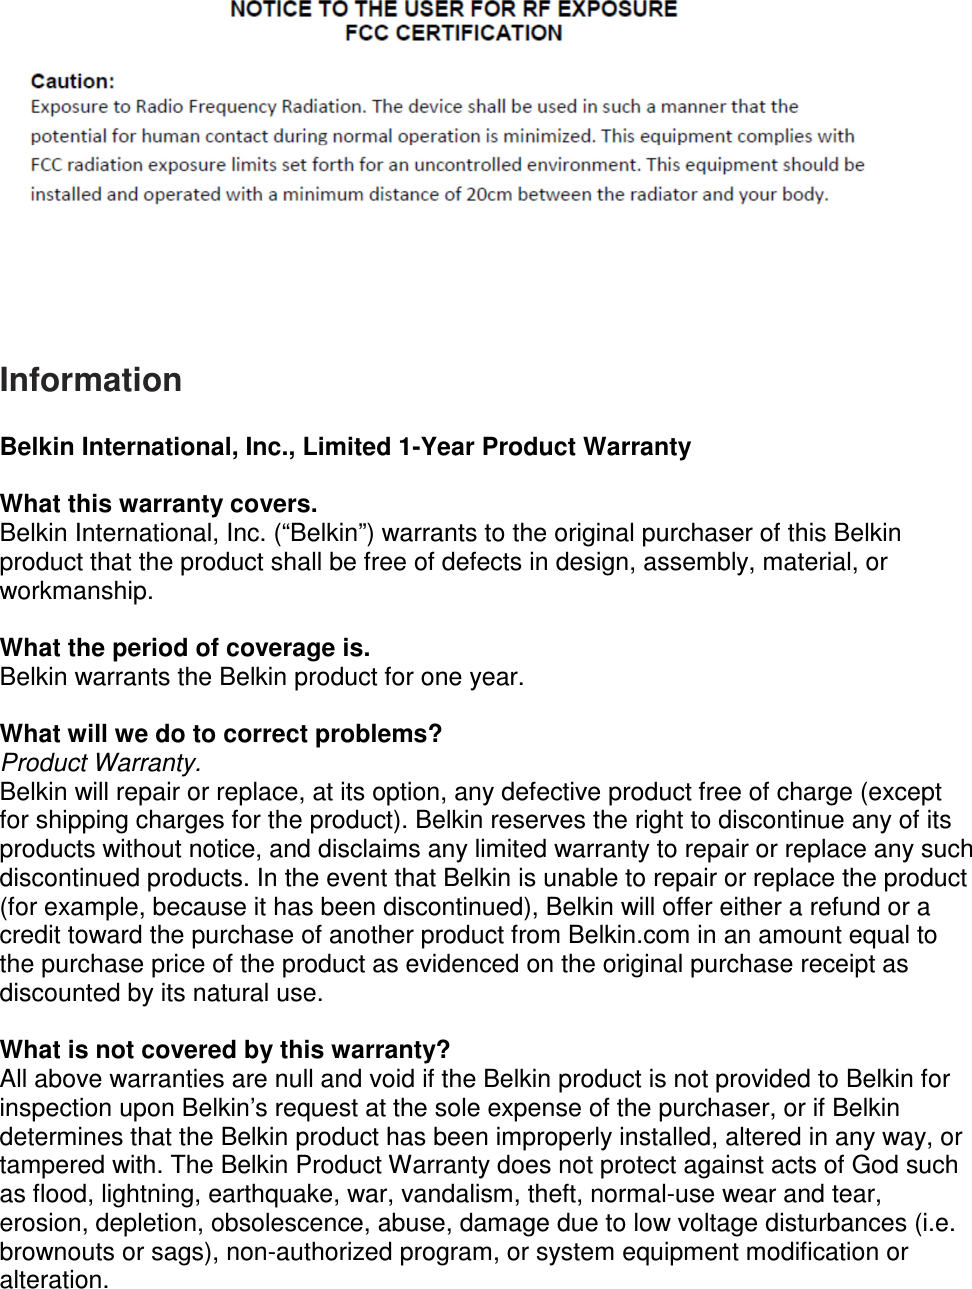      Information  Belkin International, Inc., Limited 1-Year Product Warranty  What this warranty covers. Belkin International, Inc. (“Belkin”) warrants to the original purchaser of this Belkin product that the product shall be free of defects in design, assembly, material, or workmanship.   What the period of coverage is. Belkin warrants the Belkin product for one year.  What will we do to correct problems?  Product Warranty. Belkin will repair or replace, at its option, any defective product free of charge (except for shipping charges for the product). Belkin reserves the right to discontinue any of its products without notice, and disclaims any limited warranty to repair or replace any such discontinued products. In the event that Belkin is unable to repair or replace the product (for example, because it has been discontinued), Belkin will offer either a refund or a credit toward the purchase of another product from Belkin.com in an amount equal to the purchase price of the product as evidenced on the original purchase receipt as discounted by its natural use.    What is not covered by this warranty? All above warranties are null and void if the Belkin product is not provided to Belkin for inspection upon Belkin’s request at the sole expense of the purchaser, or if Belkin determines that the Belkin product has been improperly installed, altered in any way, or tampered with. The Belkin Product Warranty does not protect against acts of God such as flood, lightning, earthquake, war, vandalism, theft, normal-use wear and tear, erosion, depletion, obsolescence, abuse, damage due to low voltage disturbances (i.e. brownouts or sags), non-authorized program, or system equipment modification or alteration. 